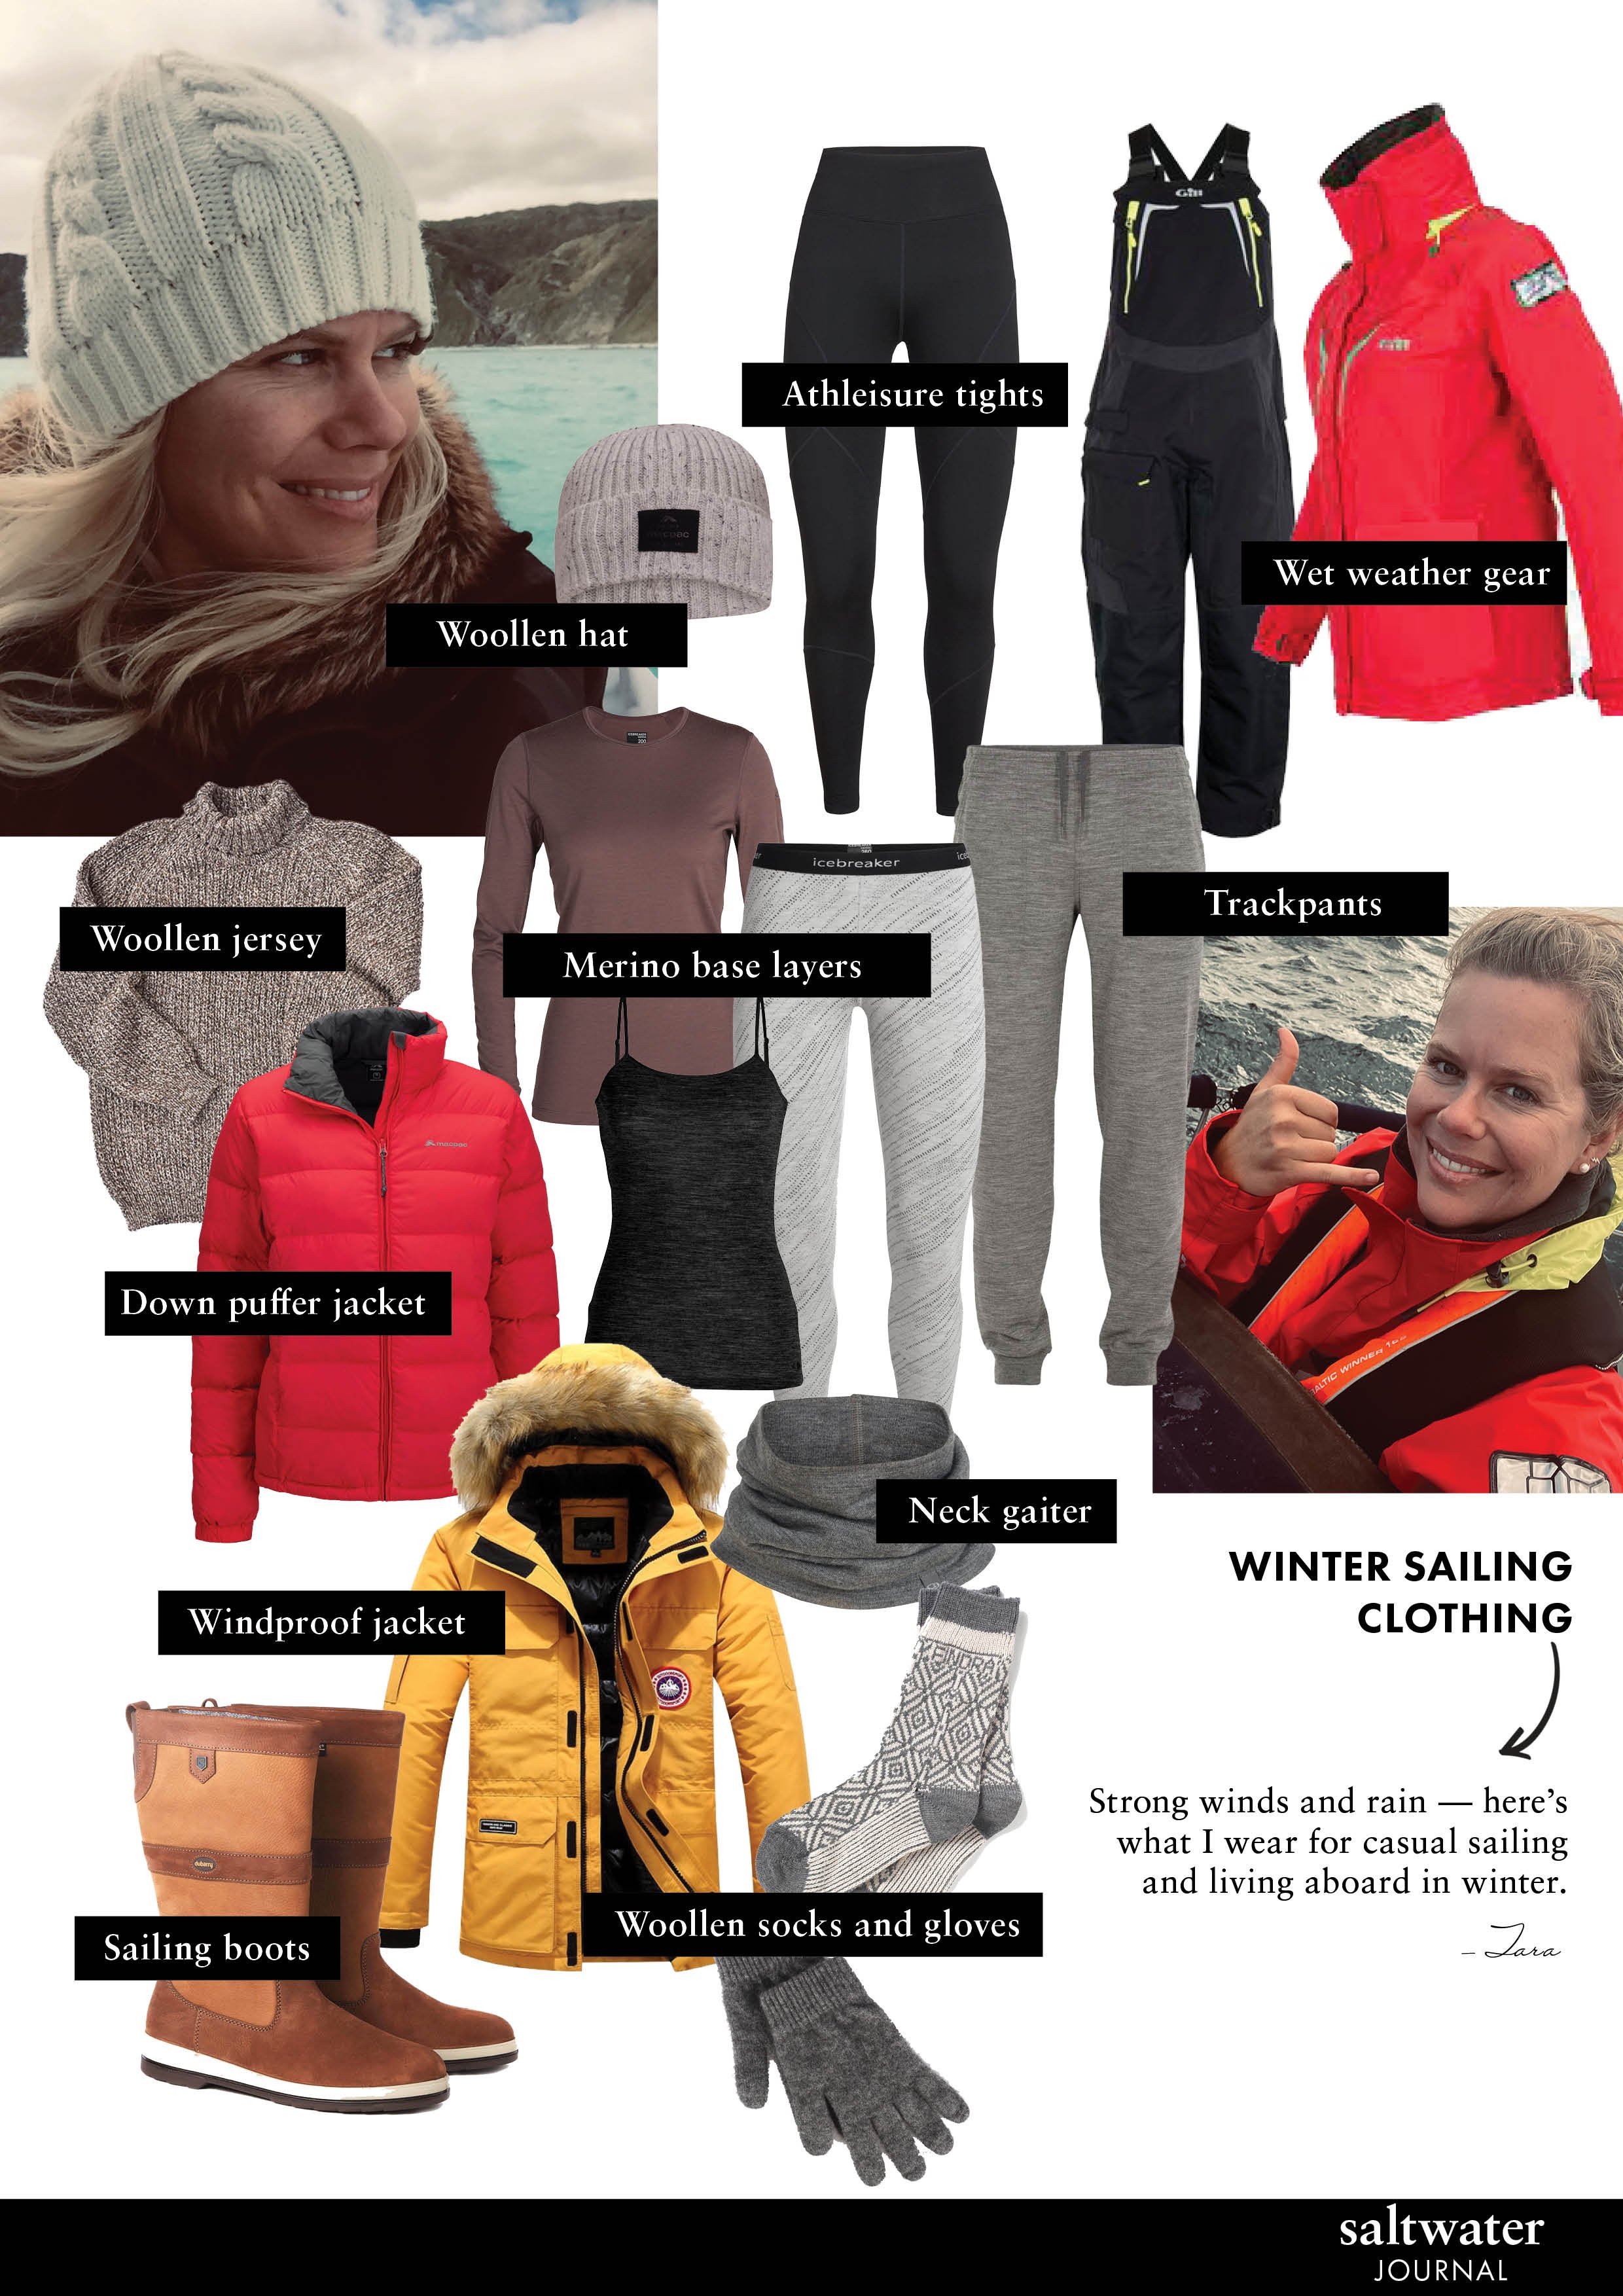 Clothes I'll Never Wear Sailing Again (And What You Should Wear